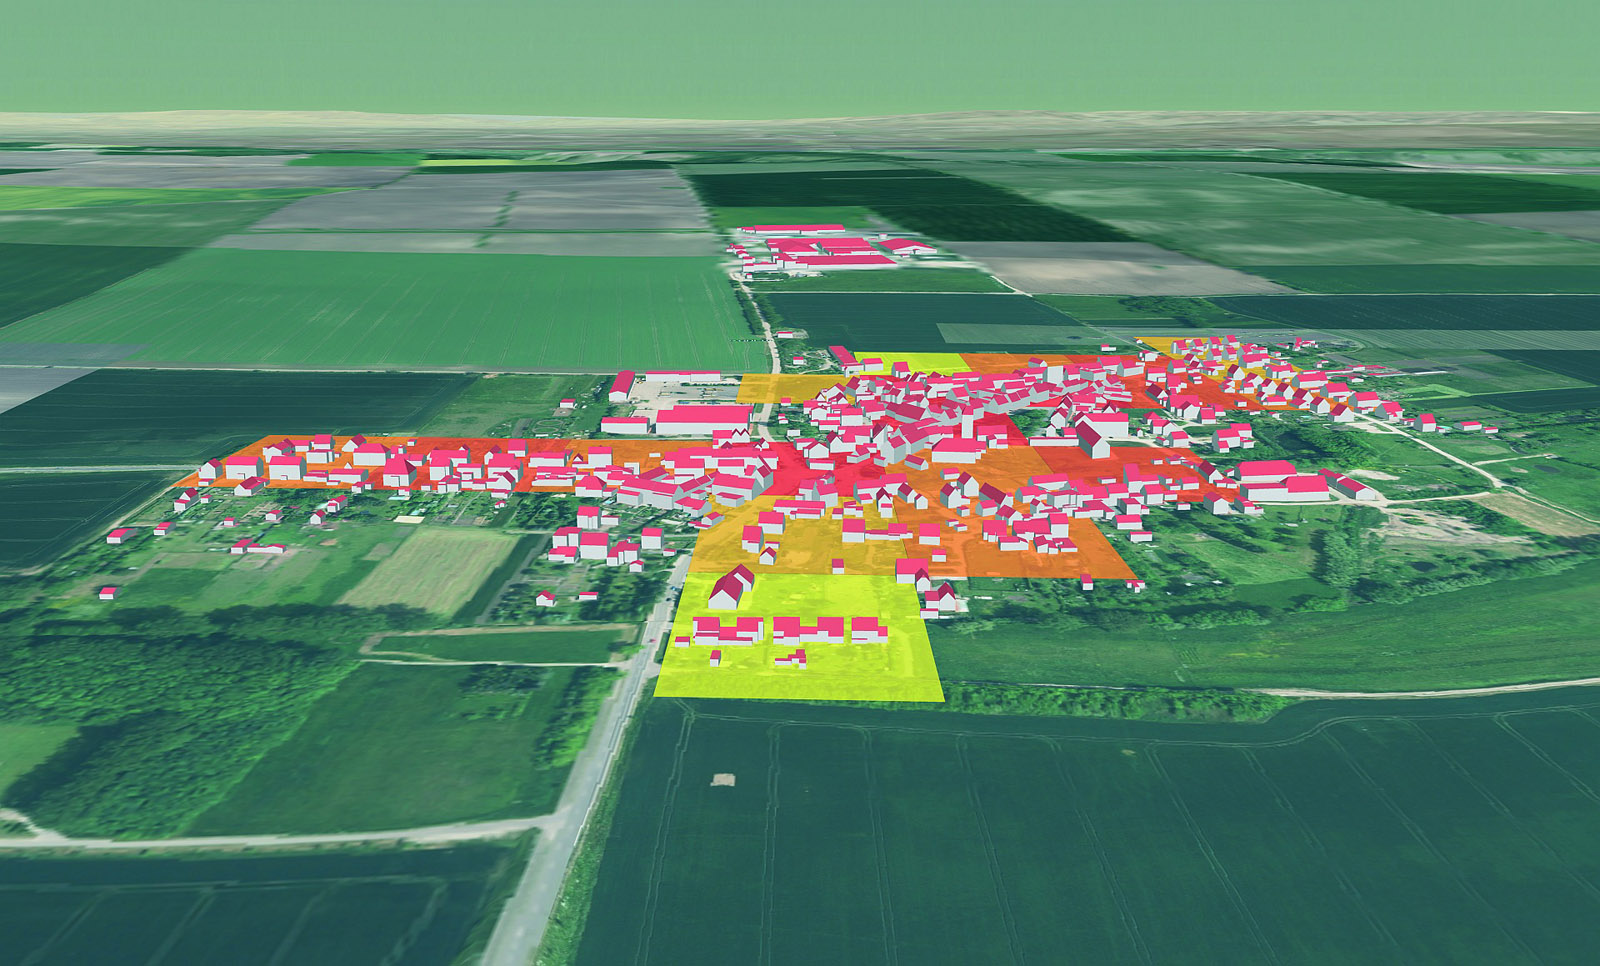 Visualization of heating demand for the municipality of Neumark (486 inhabitants) in a 100 x 100 m grid. Dark colors indicate high energy demand. The results were estimated based on the building structures.